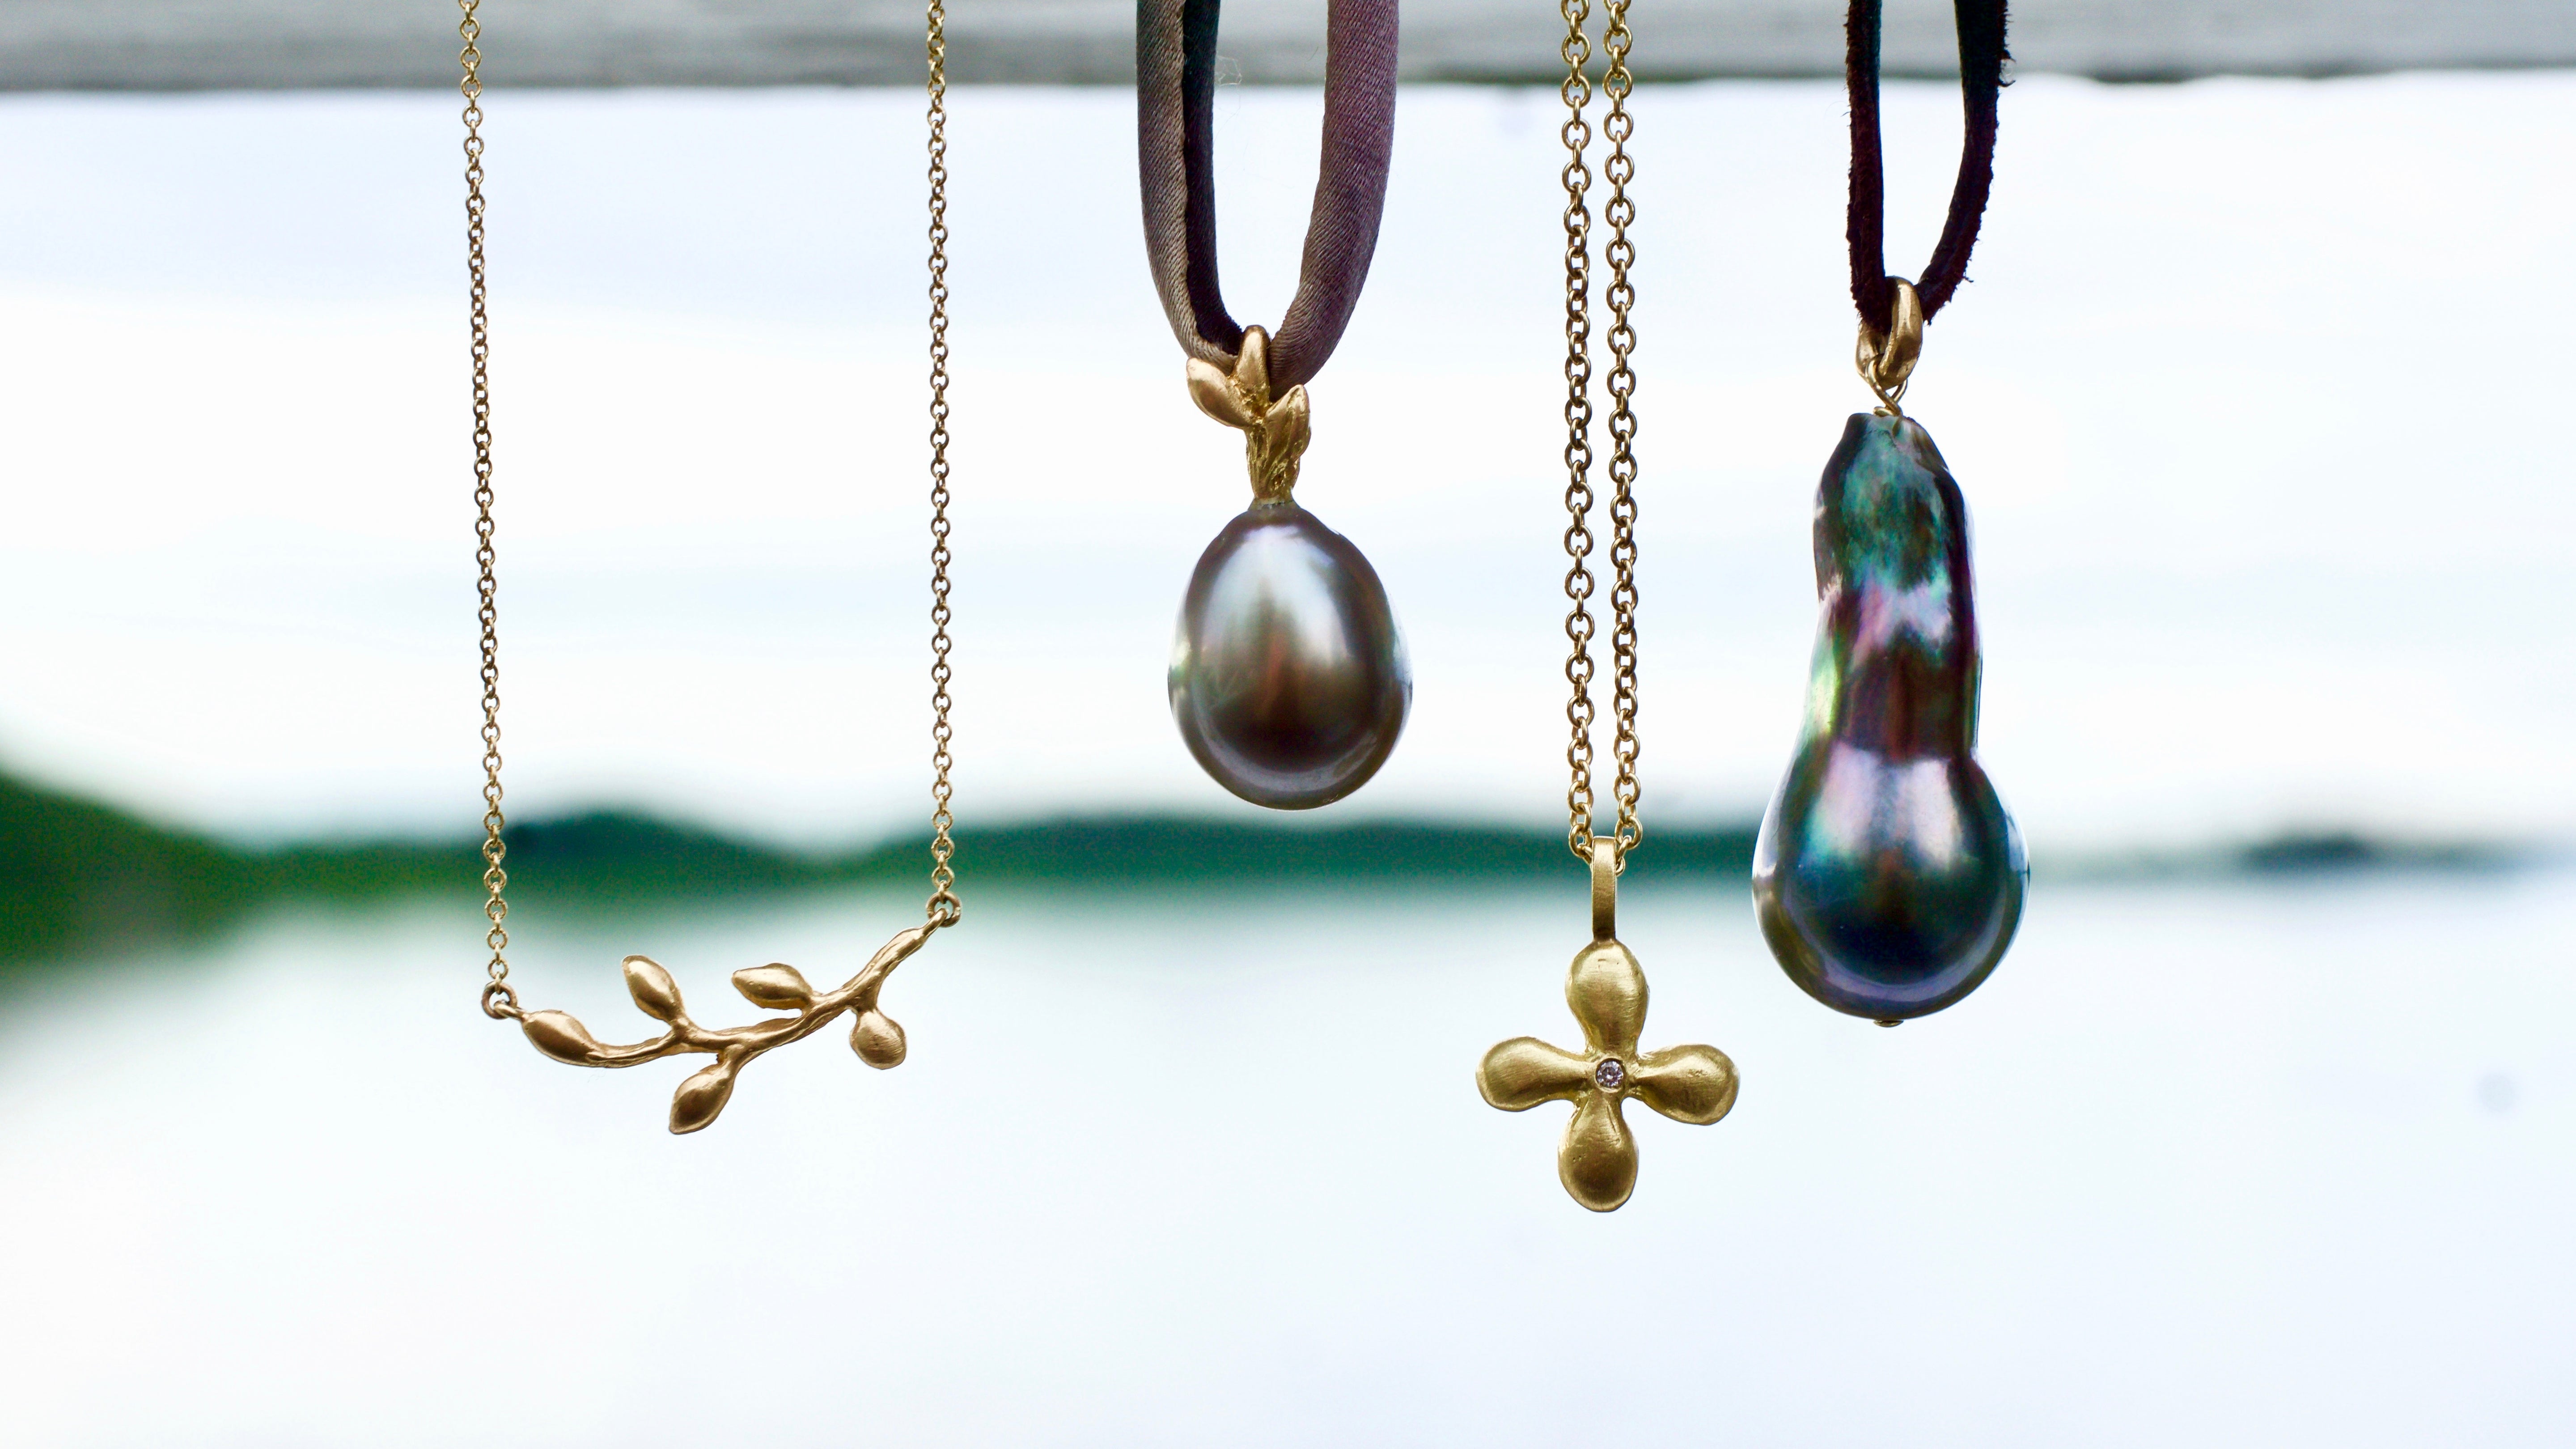 Leaf and Tahitian pearl necklaces in recycled gold